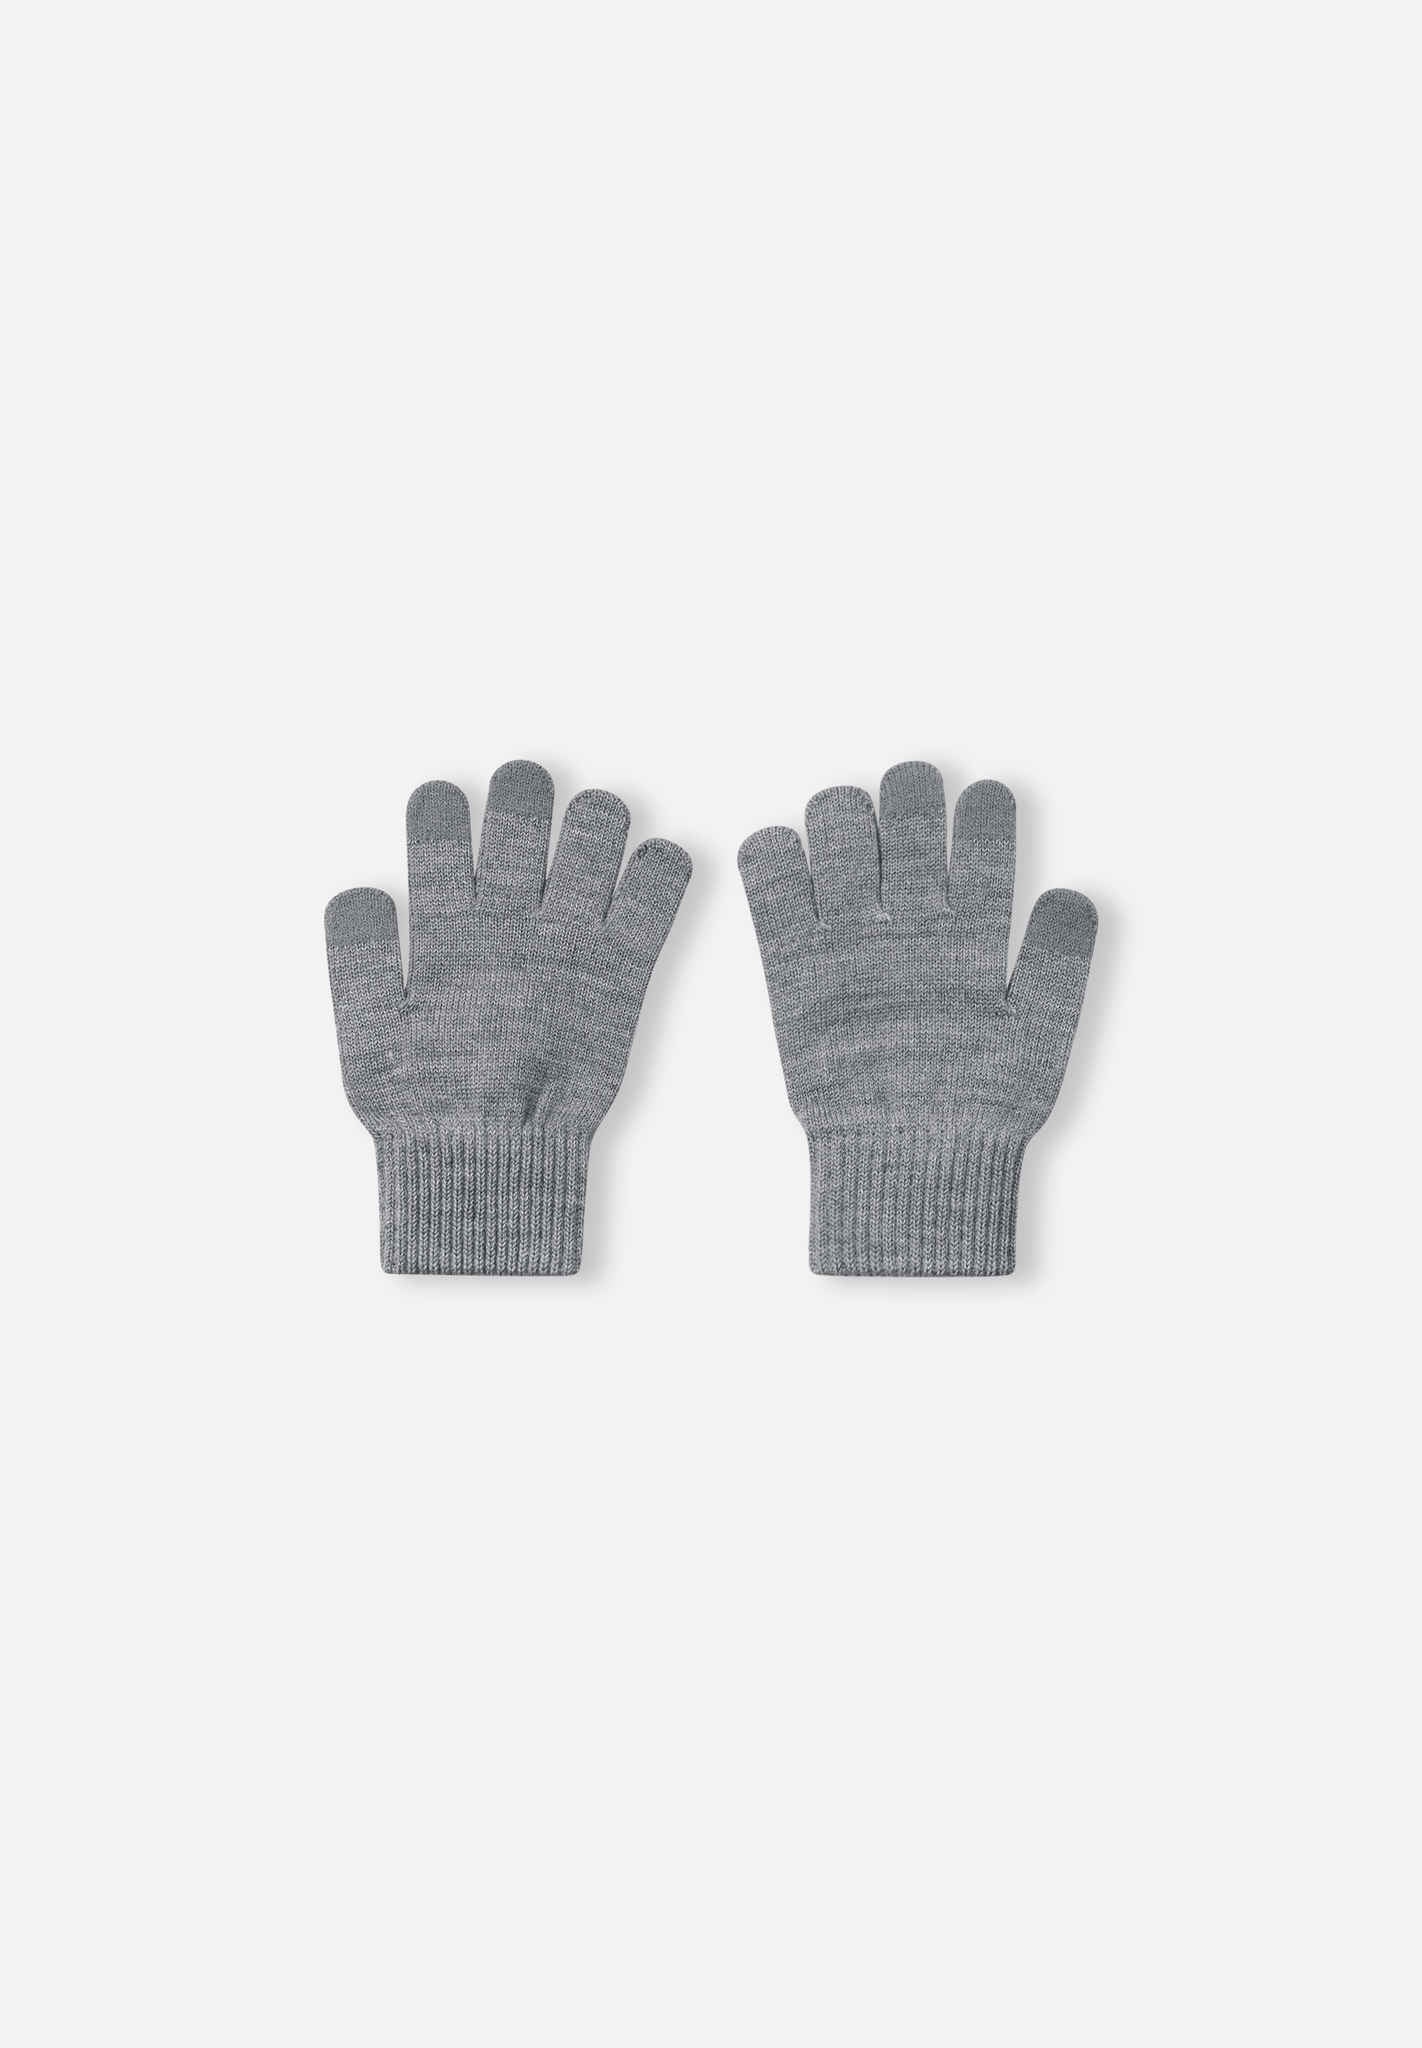 Reima Wool Blend Knitted Gloves - Rimo